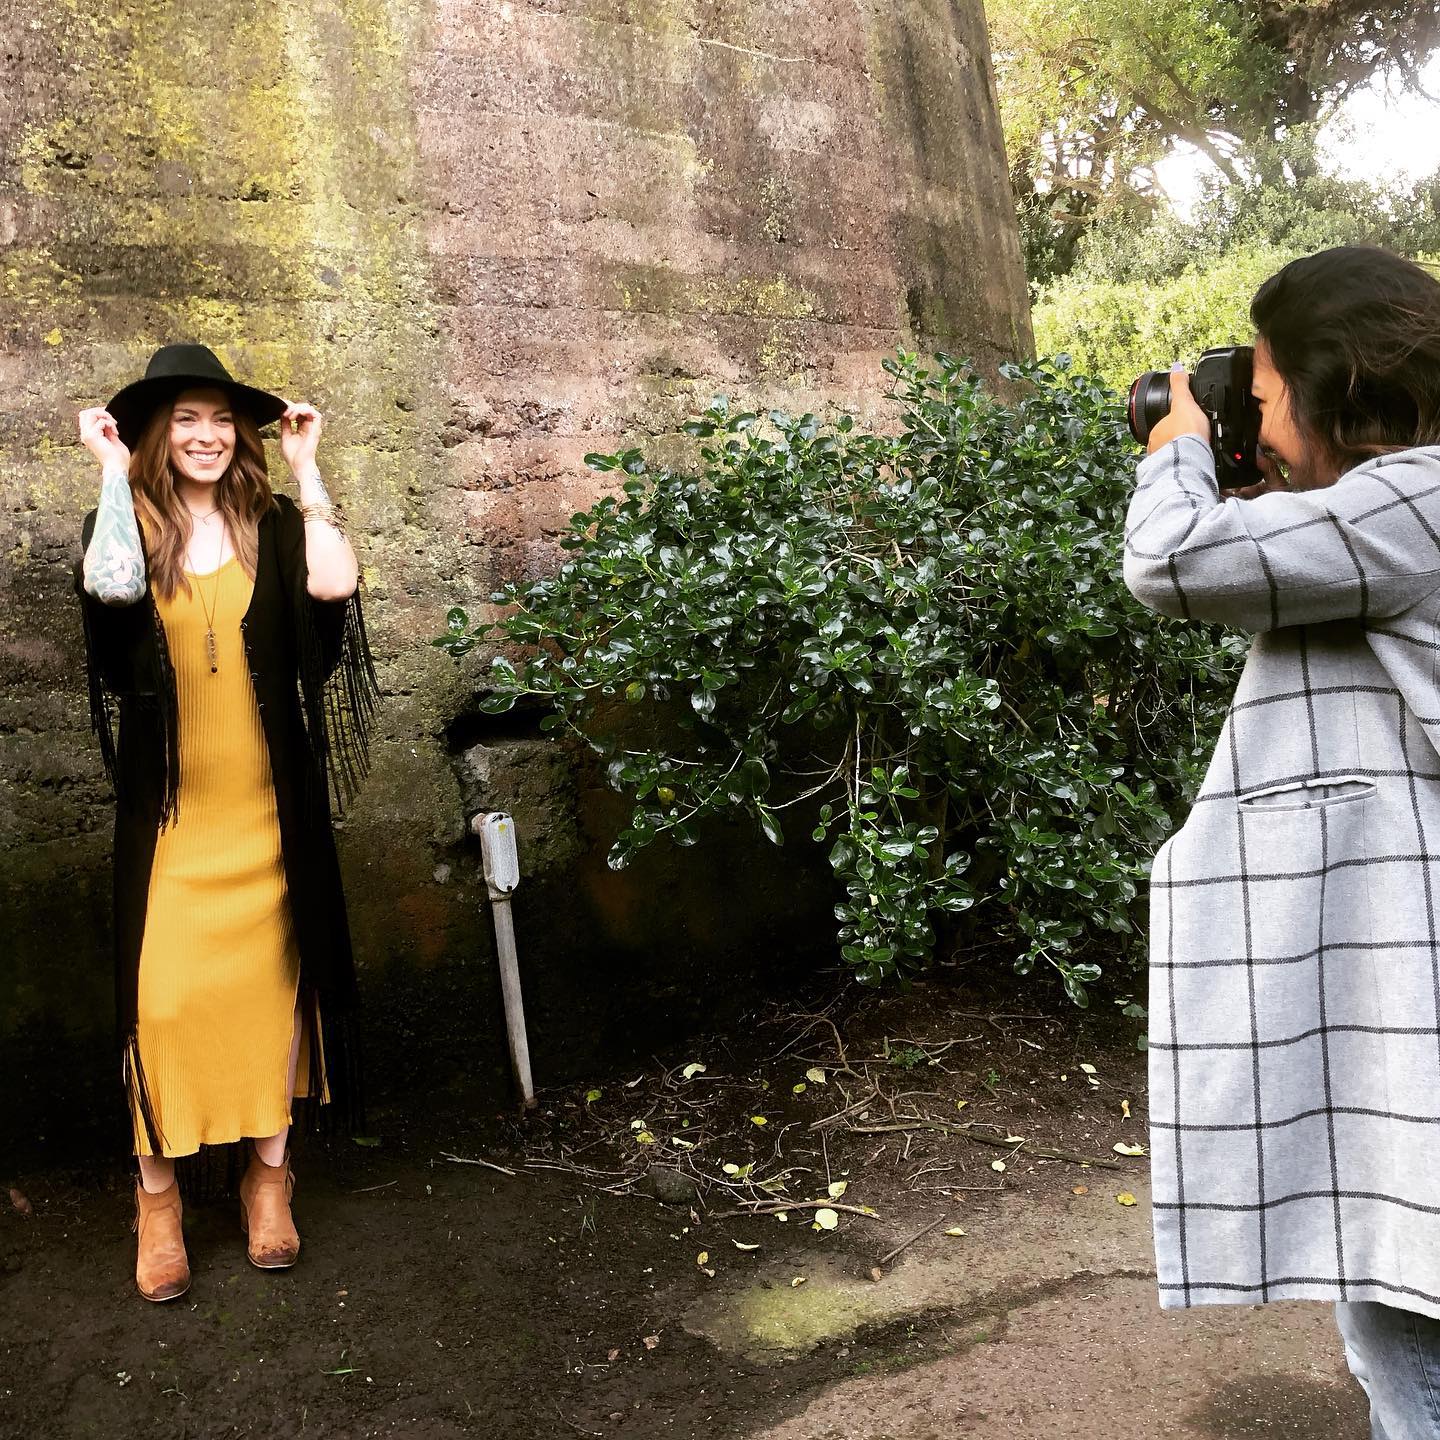 Behind the Scenes: Our Photoshoot in Golden Gate Park